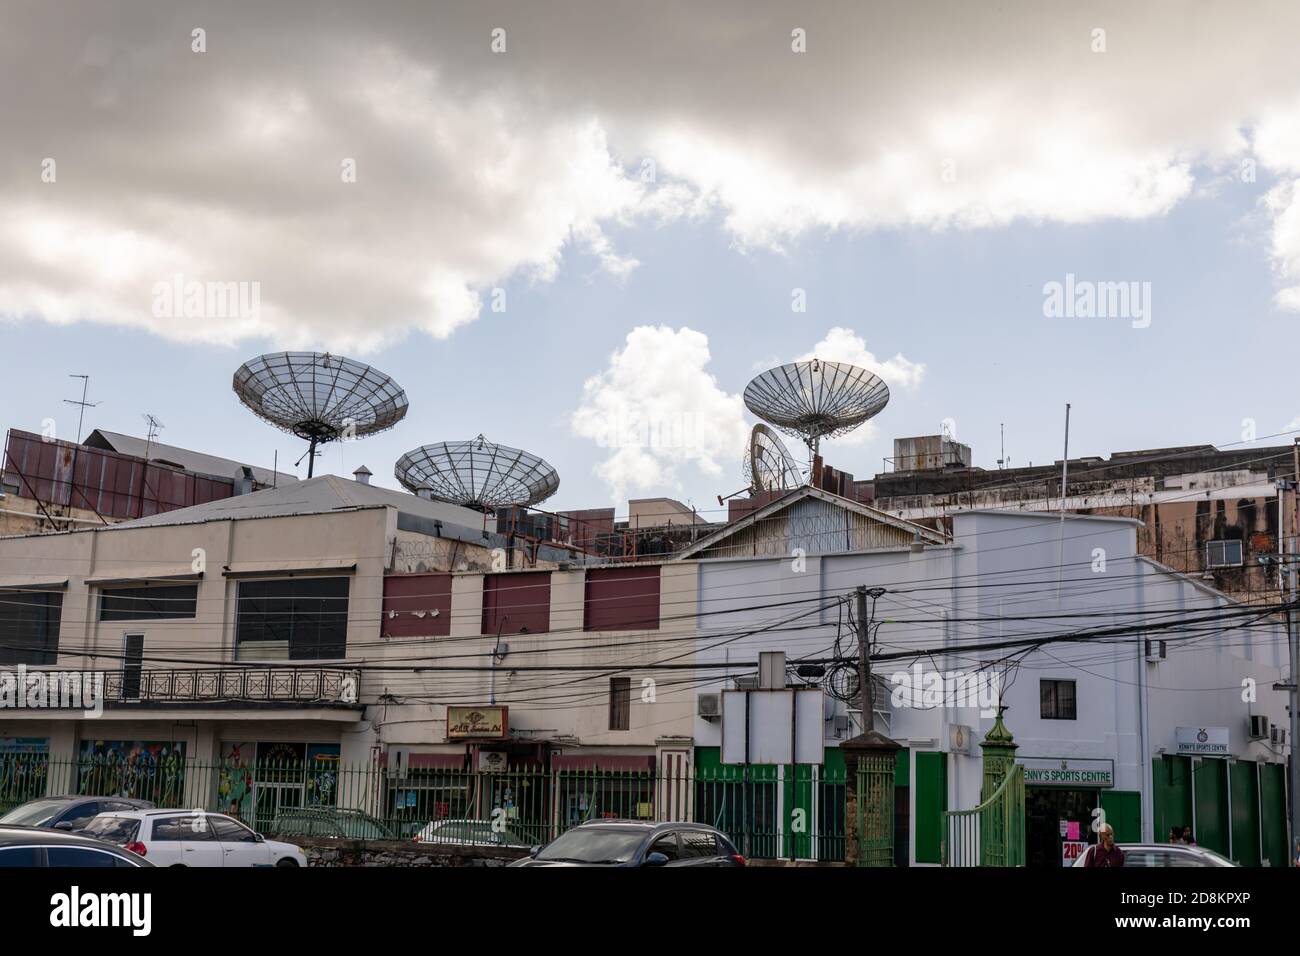 08 JAN 2020 - Port of Spain, Trinidad and Tobago - Satellite dishes over a building Stock Photo